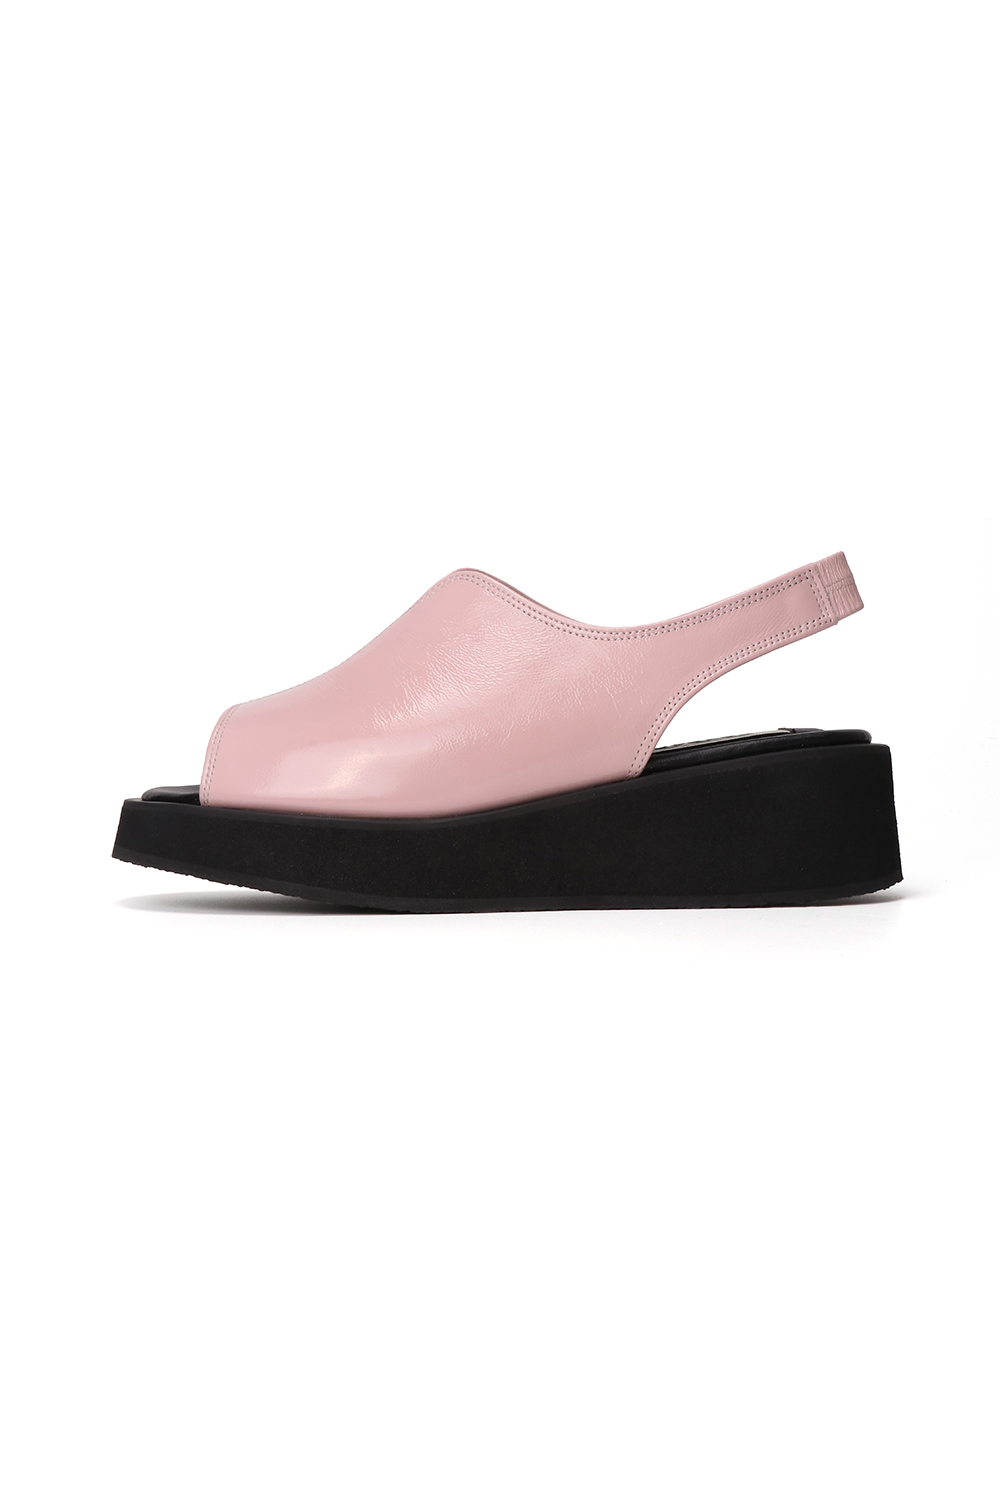 COY CHUNKY SANDALS [DUSTY PINK]